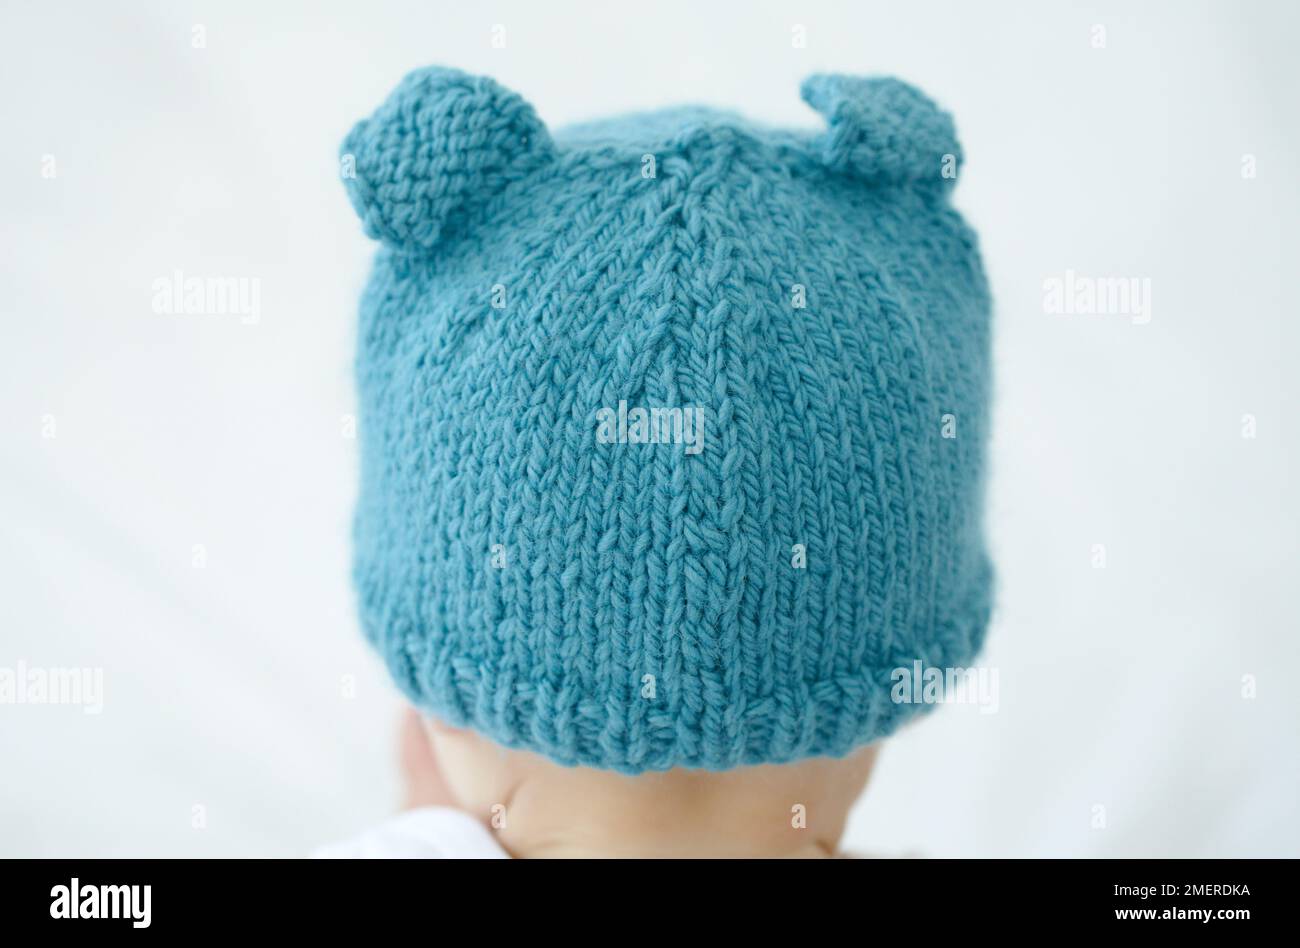 Knitted ear beanie hat Stock Photo